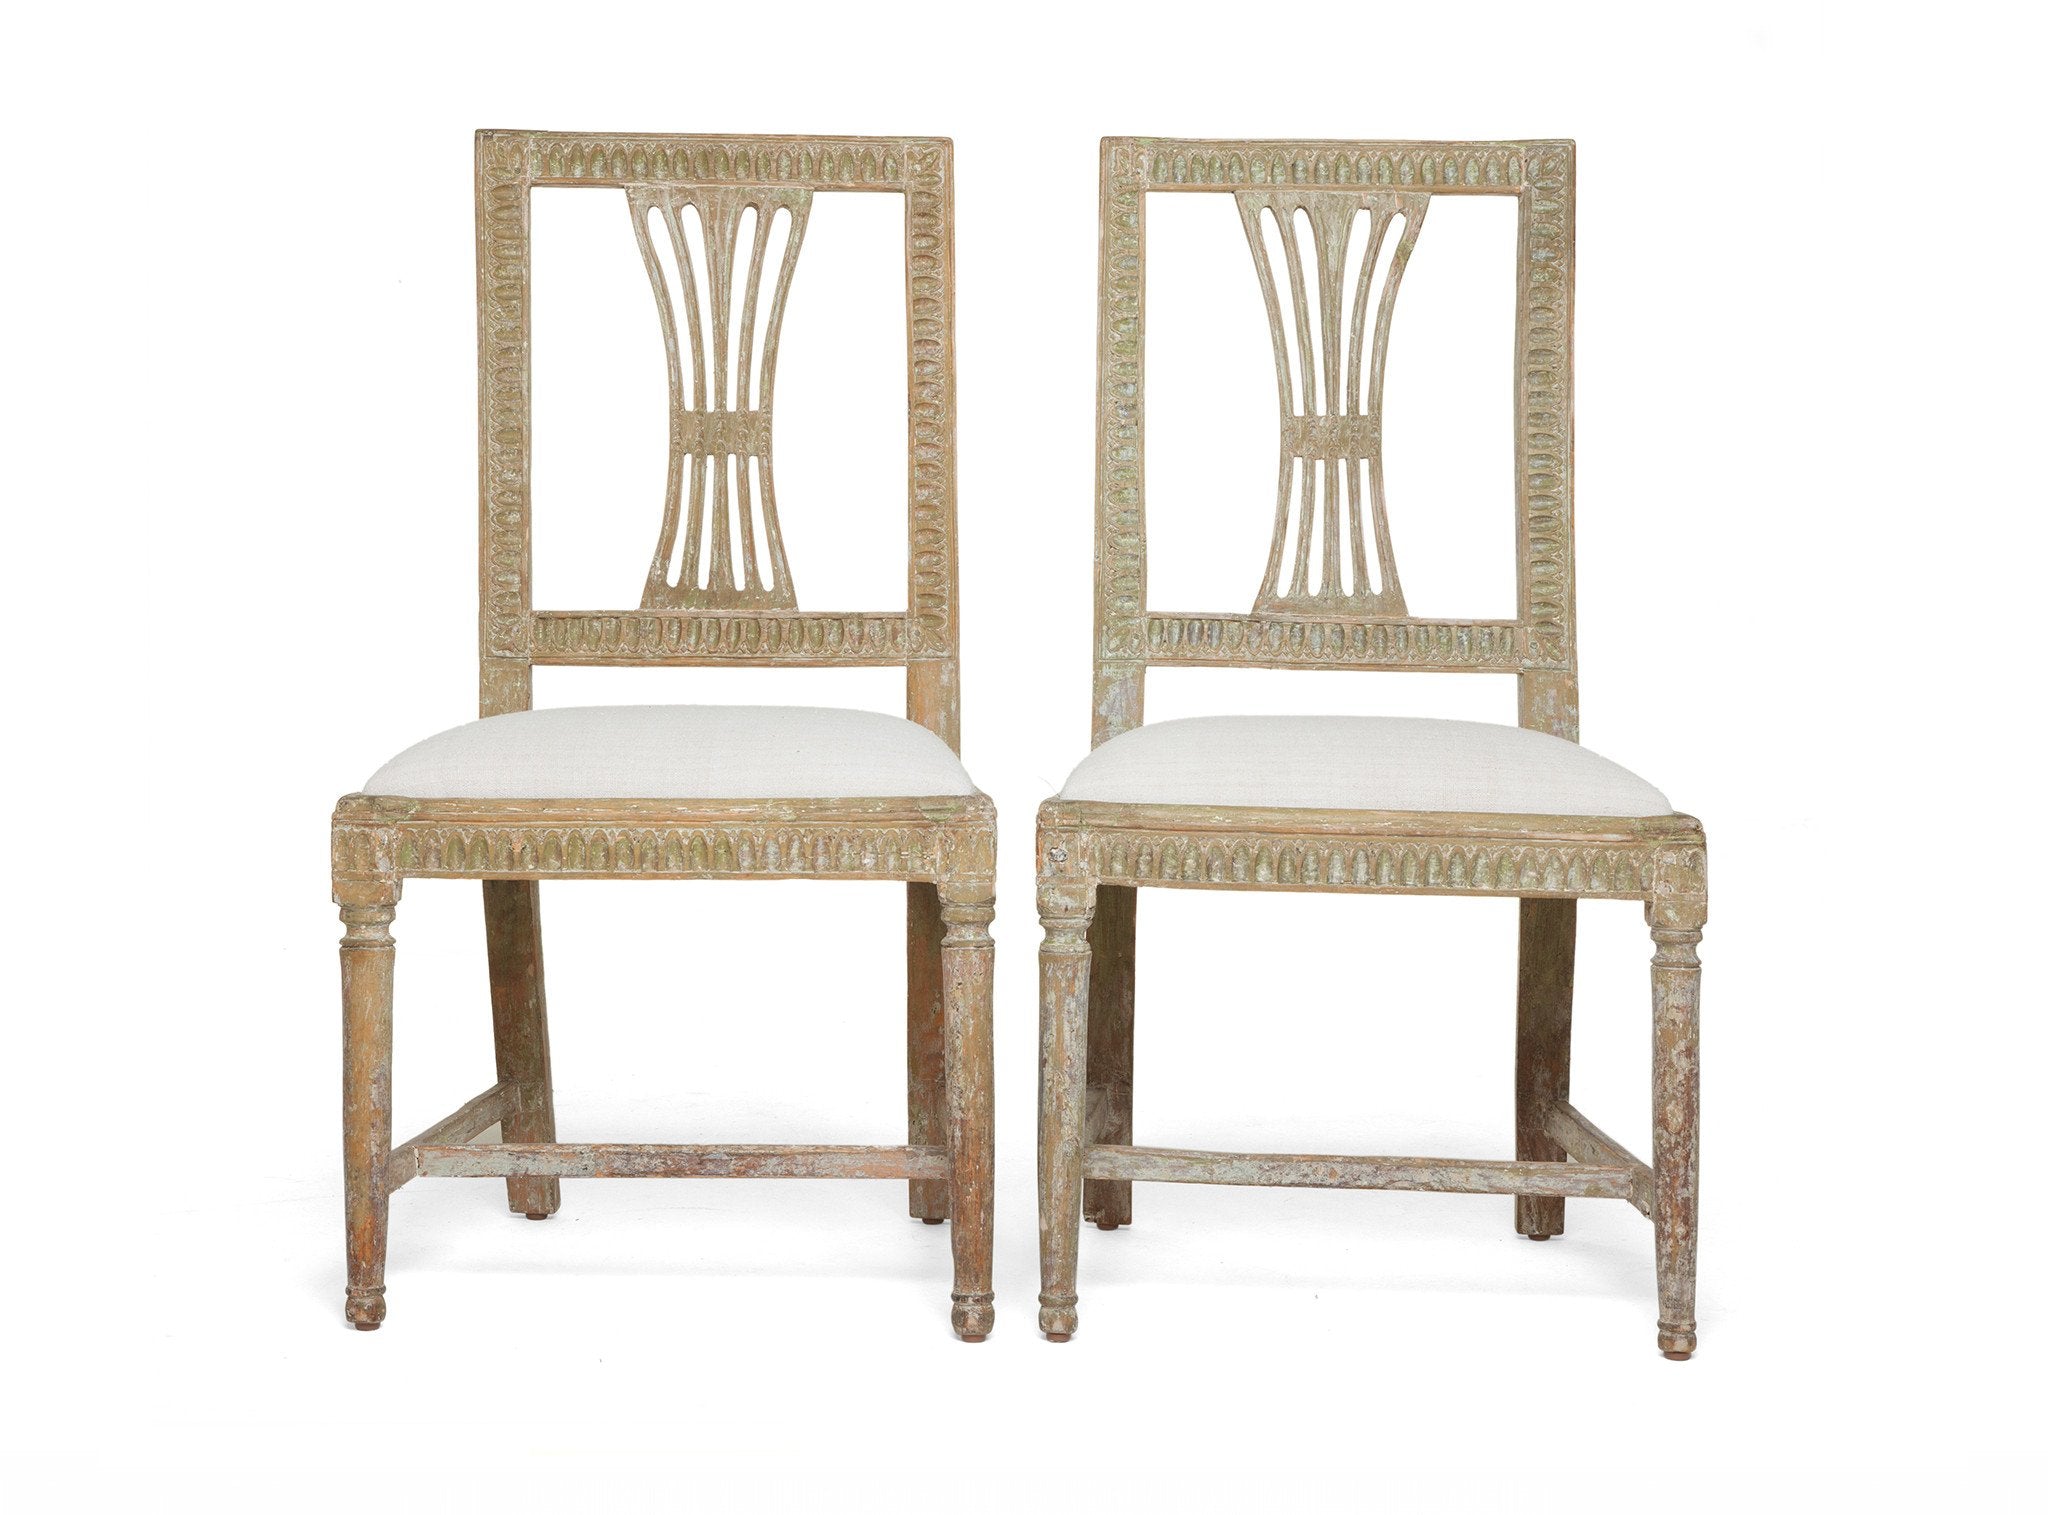 GREEN SIDE CHAIRS - GIANNETTI